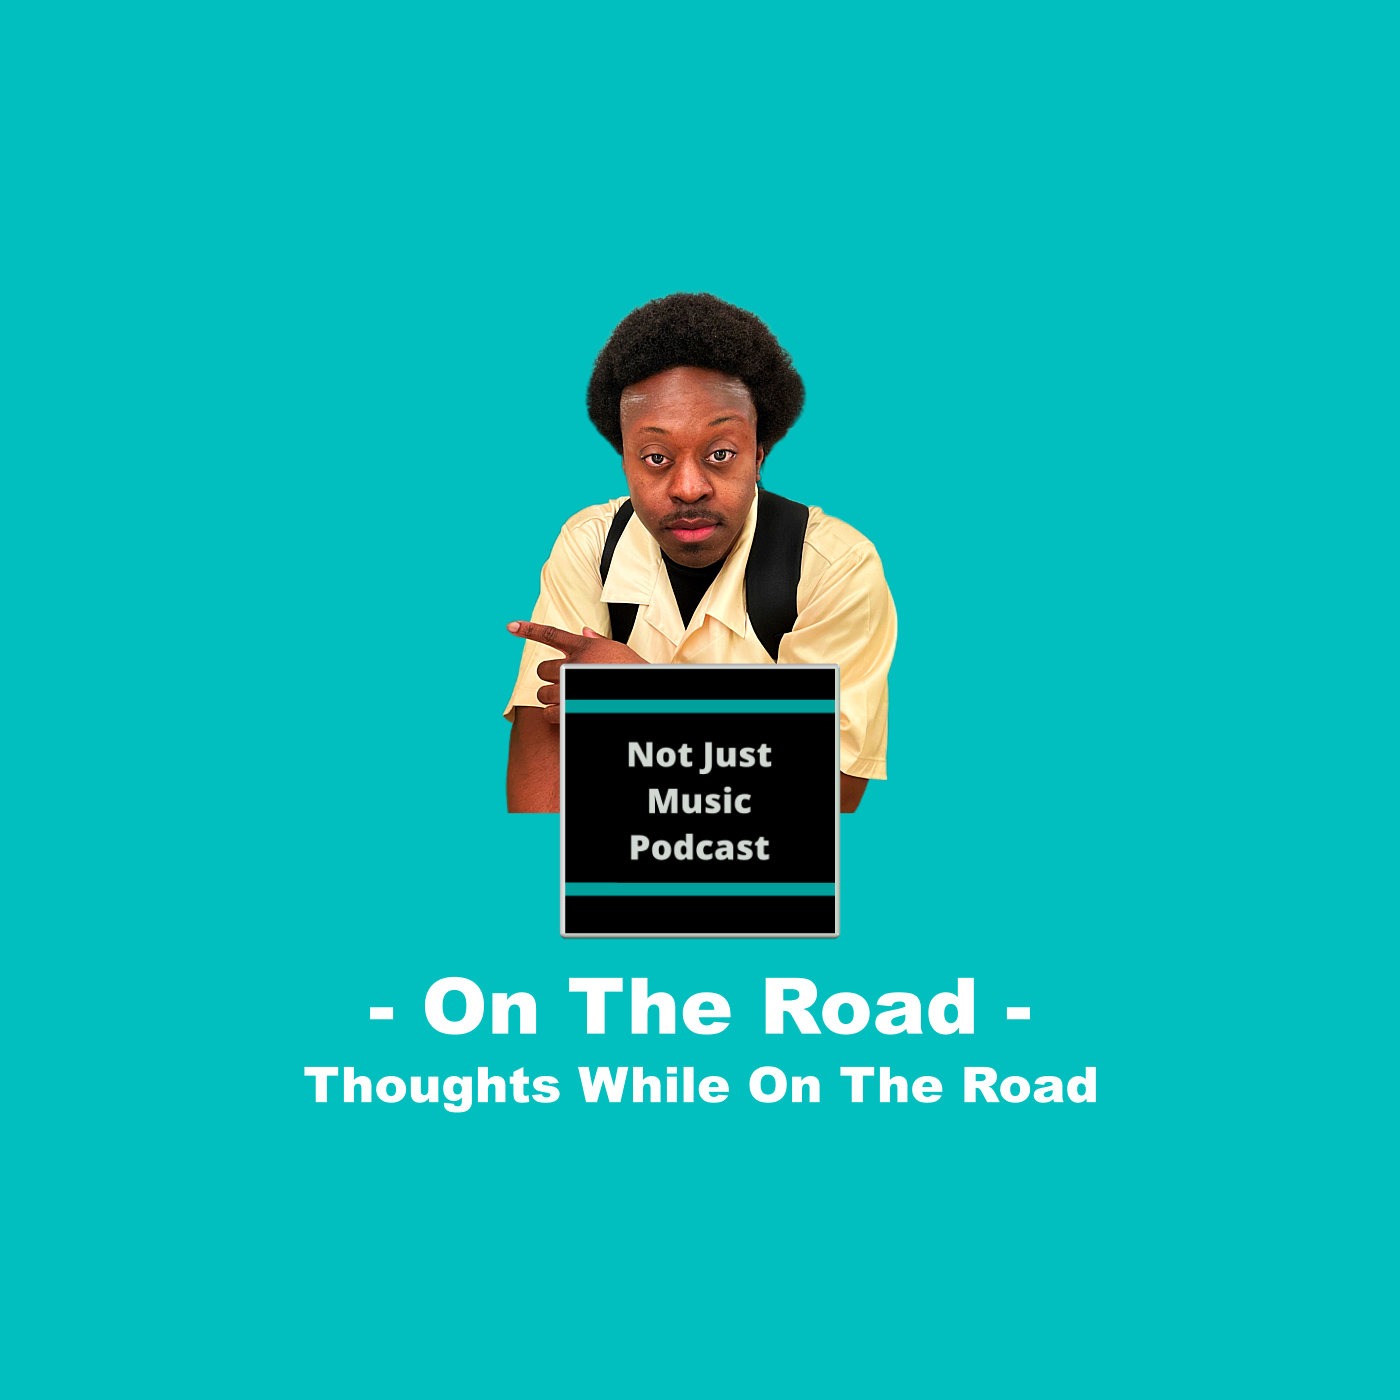 Thoughts While On The Road - On The Road